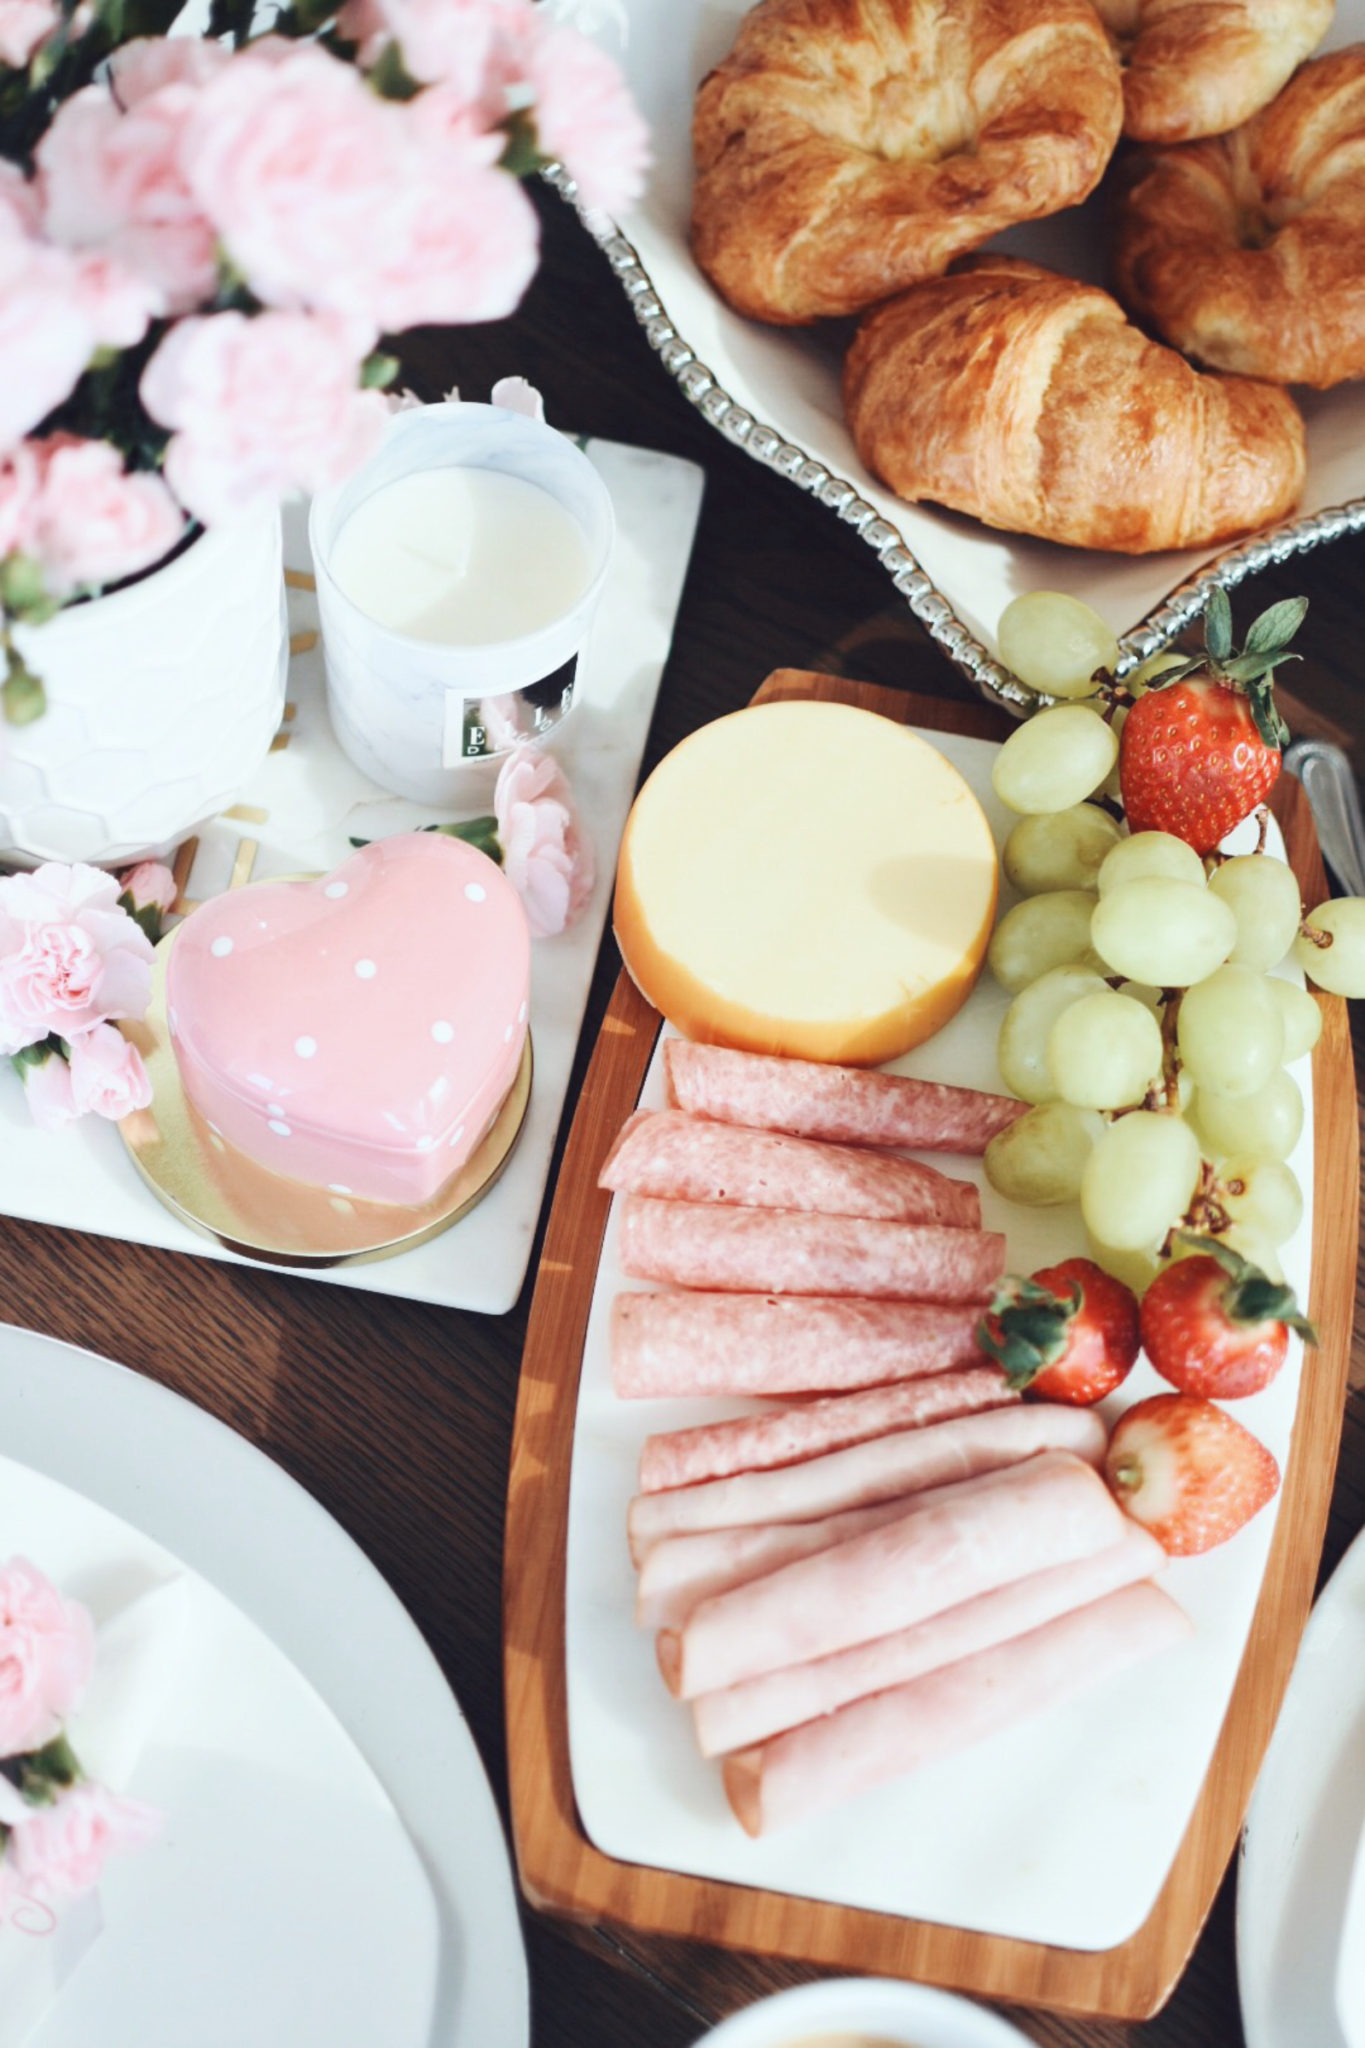 How to make saint valentine's day special again - THE PERFECT SAINT VALENTINES  DAY BRUNCH by popular lifestyle blogger Chic Talk